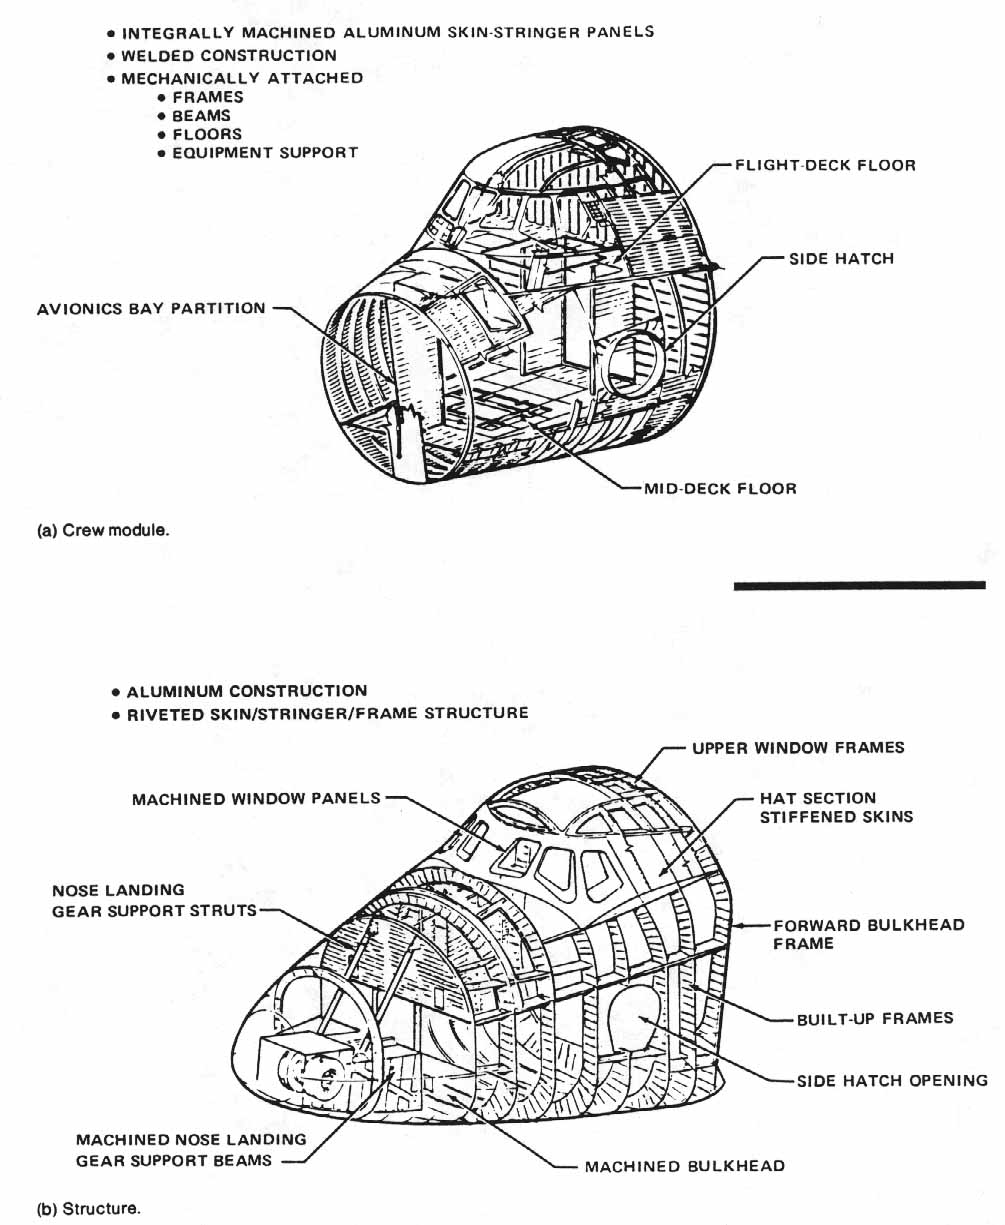 cut-away drawing of the Shuttle's crew compartment